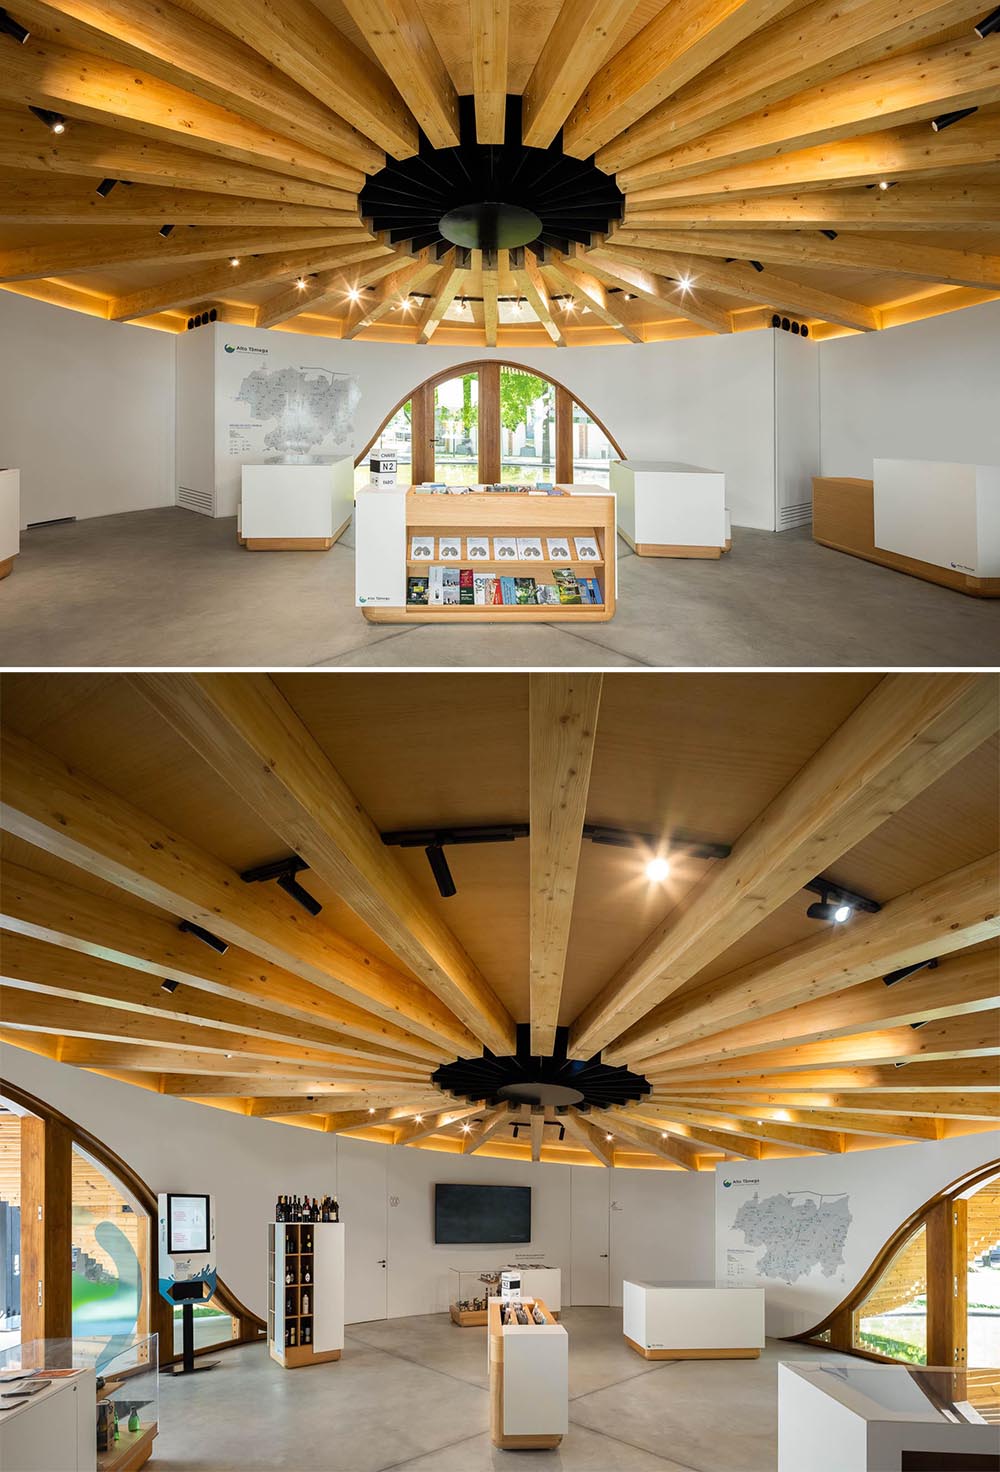 Inside this round building, there's a single open-space room with an exposed wood ceiling,